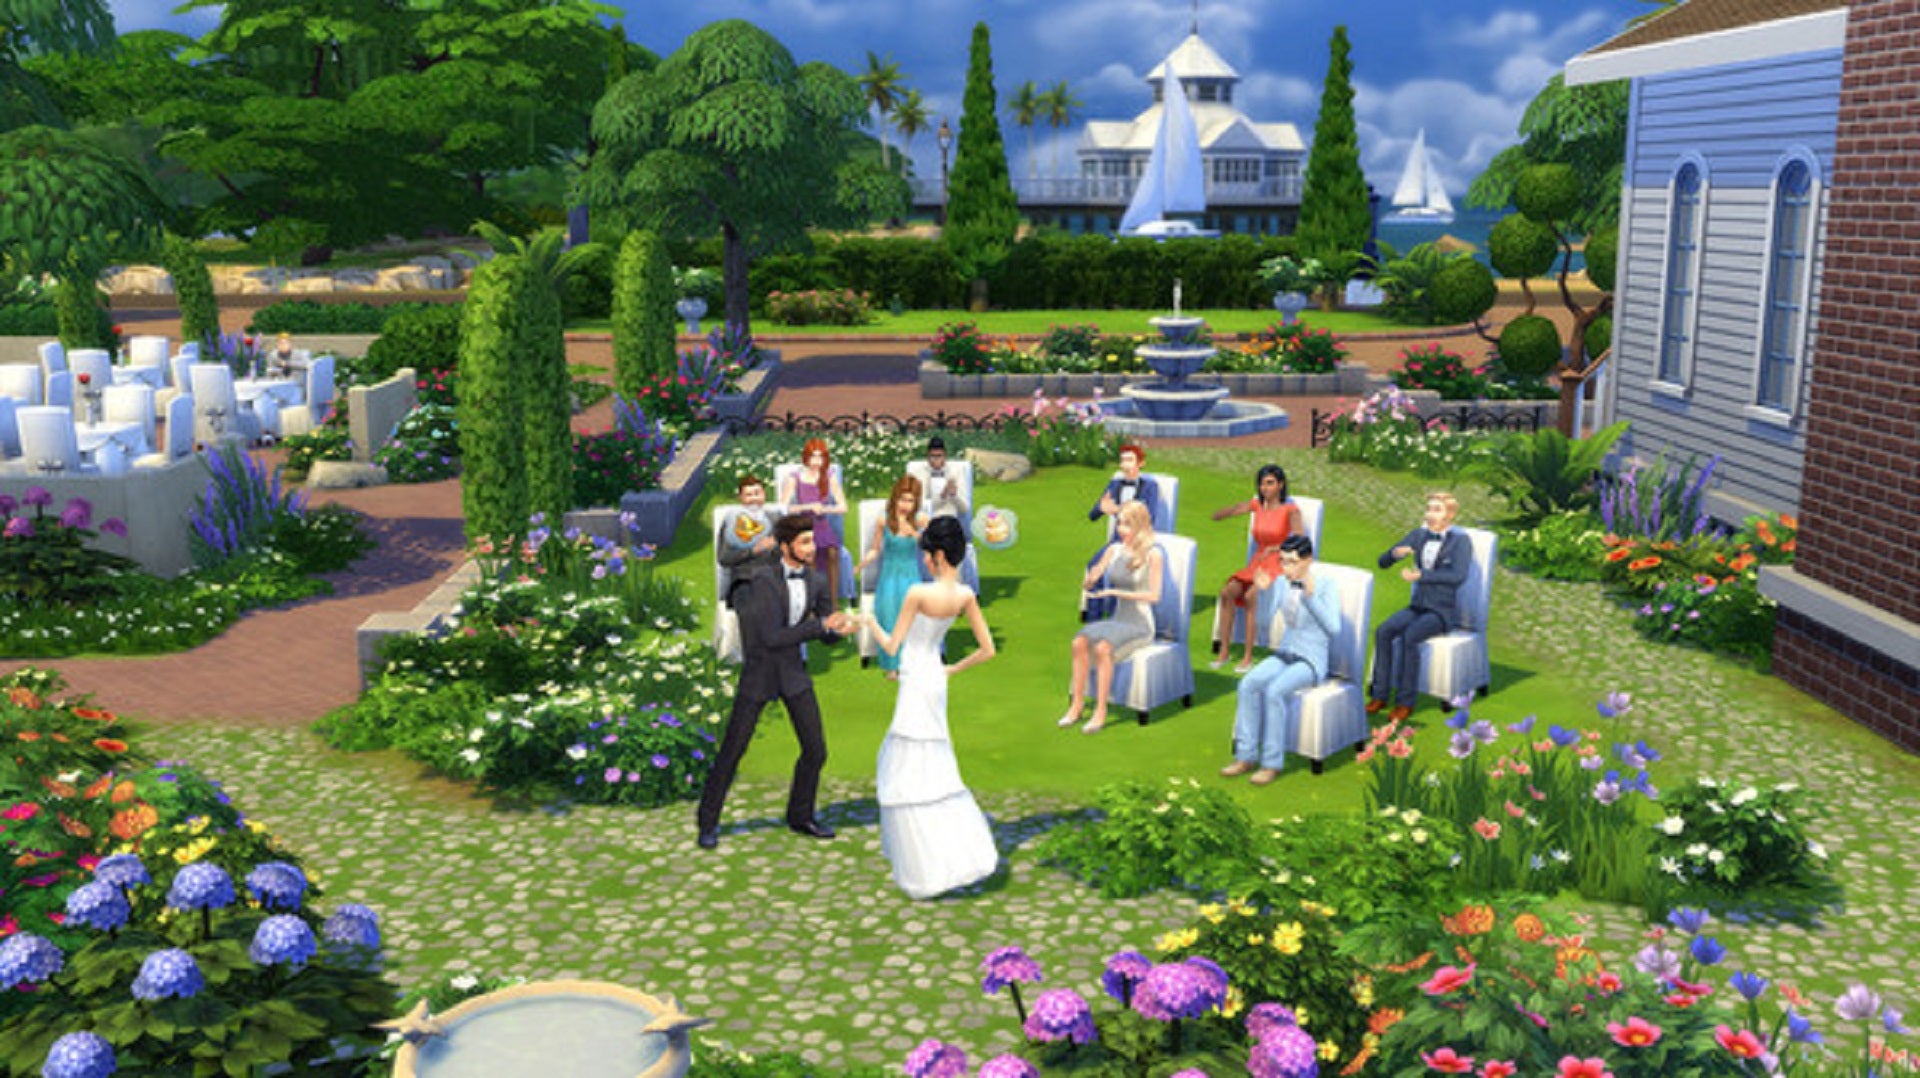 An outdoor wedding in The Sims 4.